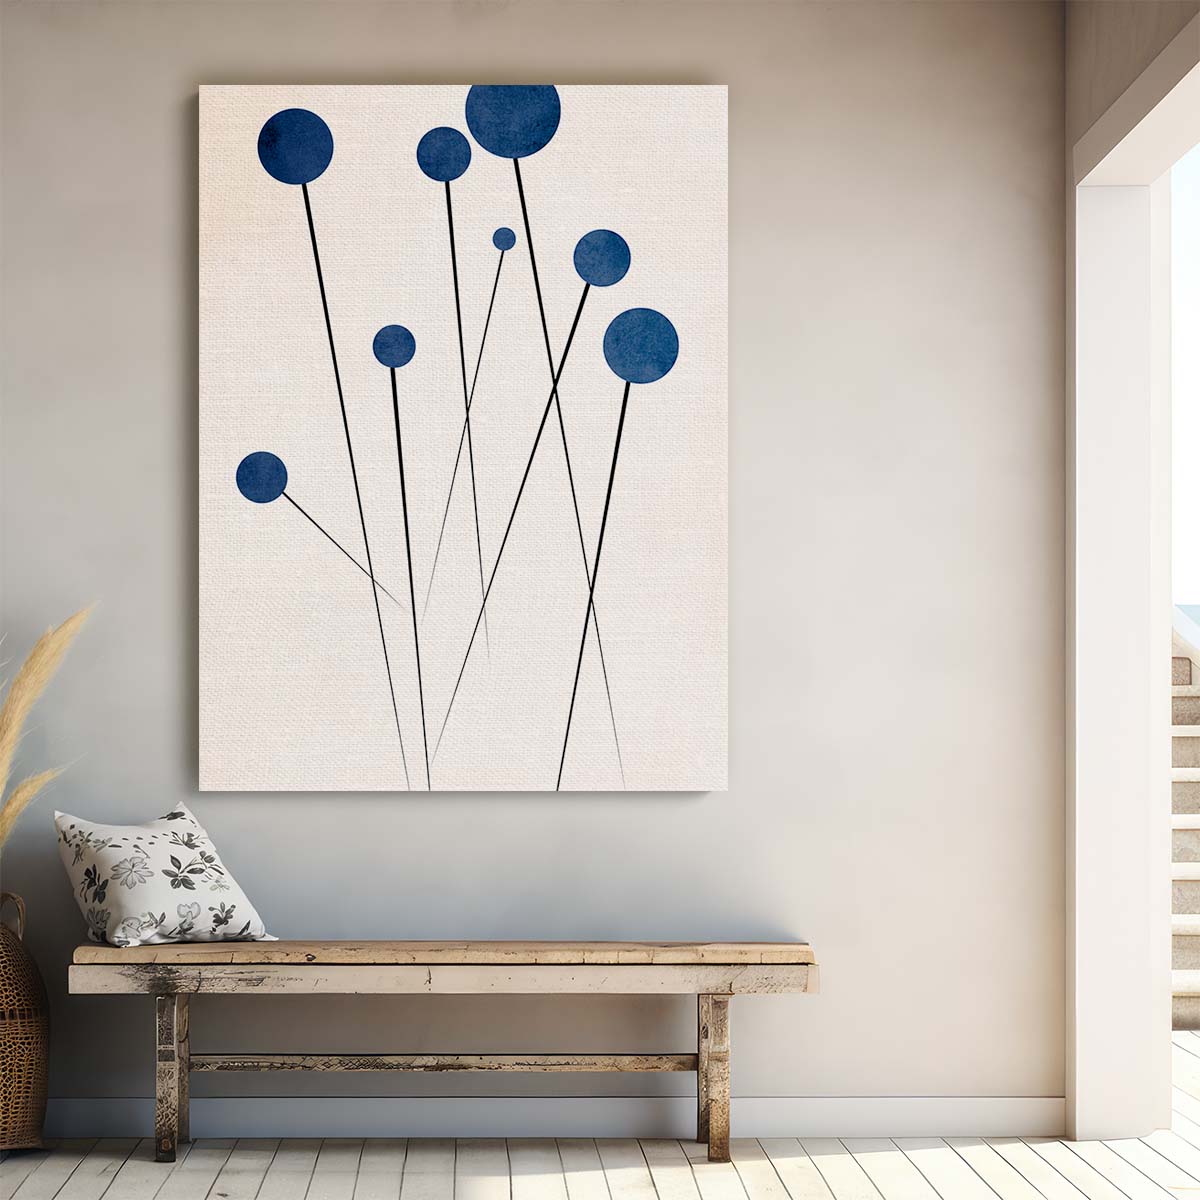 Kubistika's Bright Blueberry Illustration Art on White Background by Luxuriance Designs, made in USA